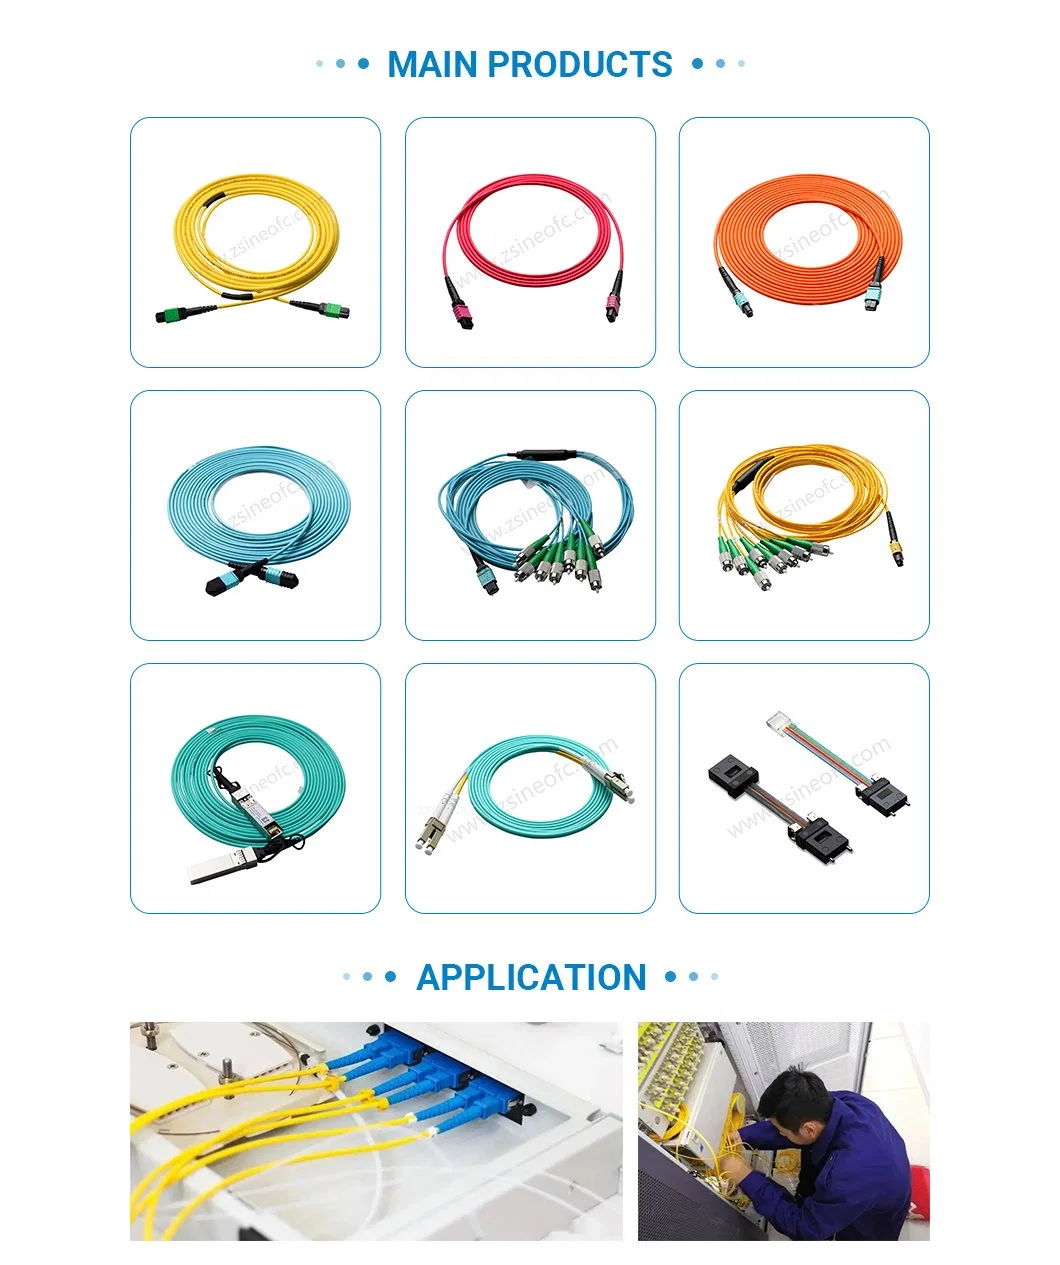 Optical Fiber CAT6 Network Cable for Fast Data Transmission